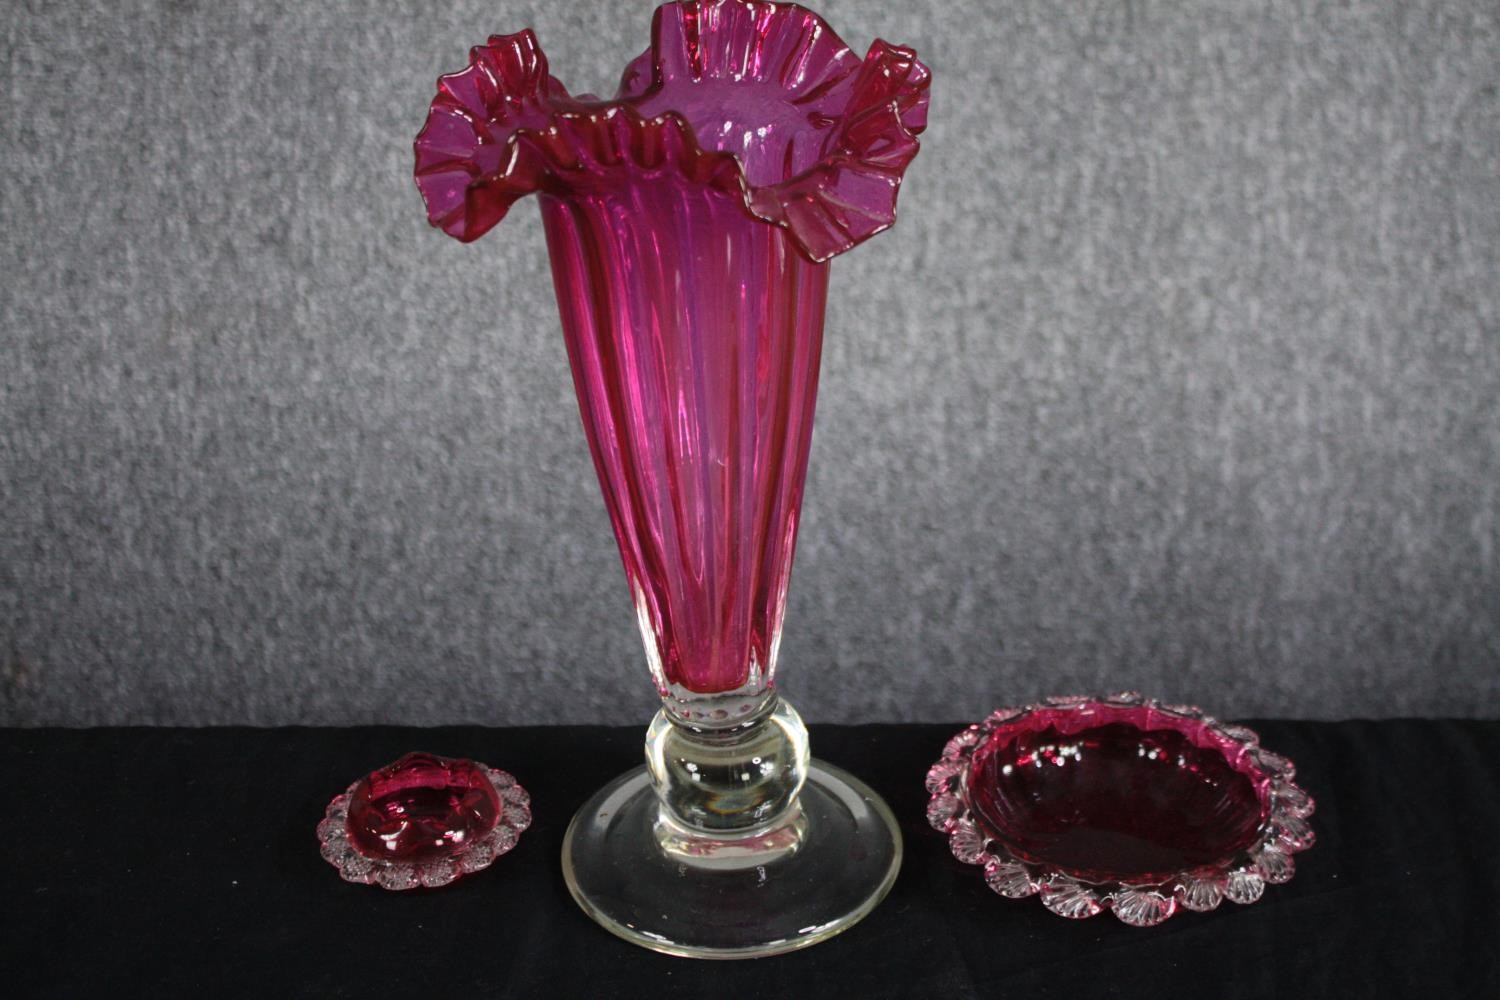 A Victorian decorative Cranberry glass trumpet vase with with ruffled edge and two small Cranberry